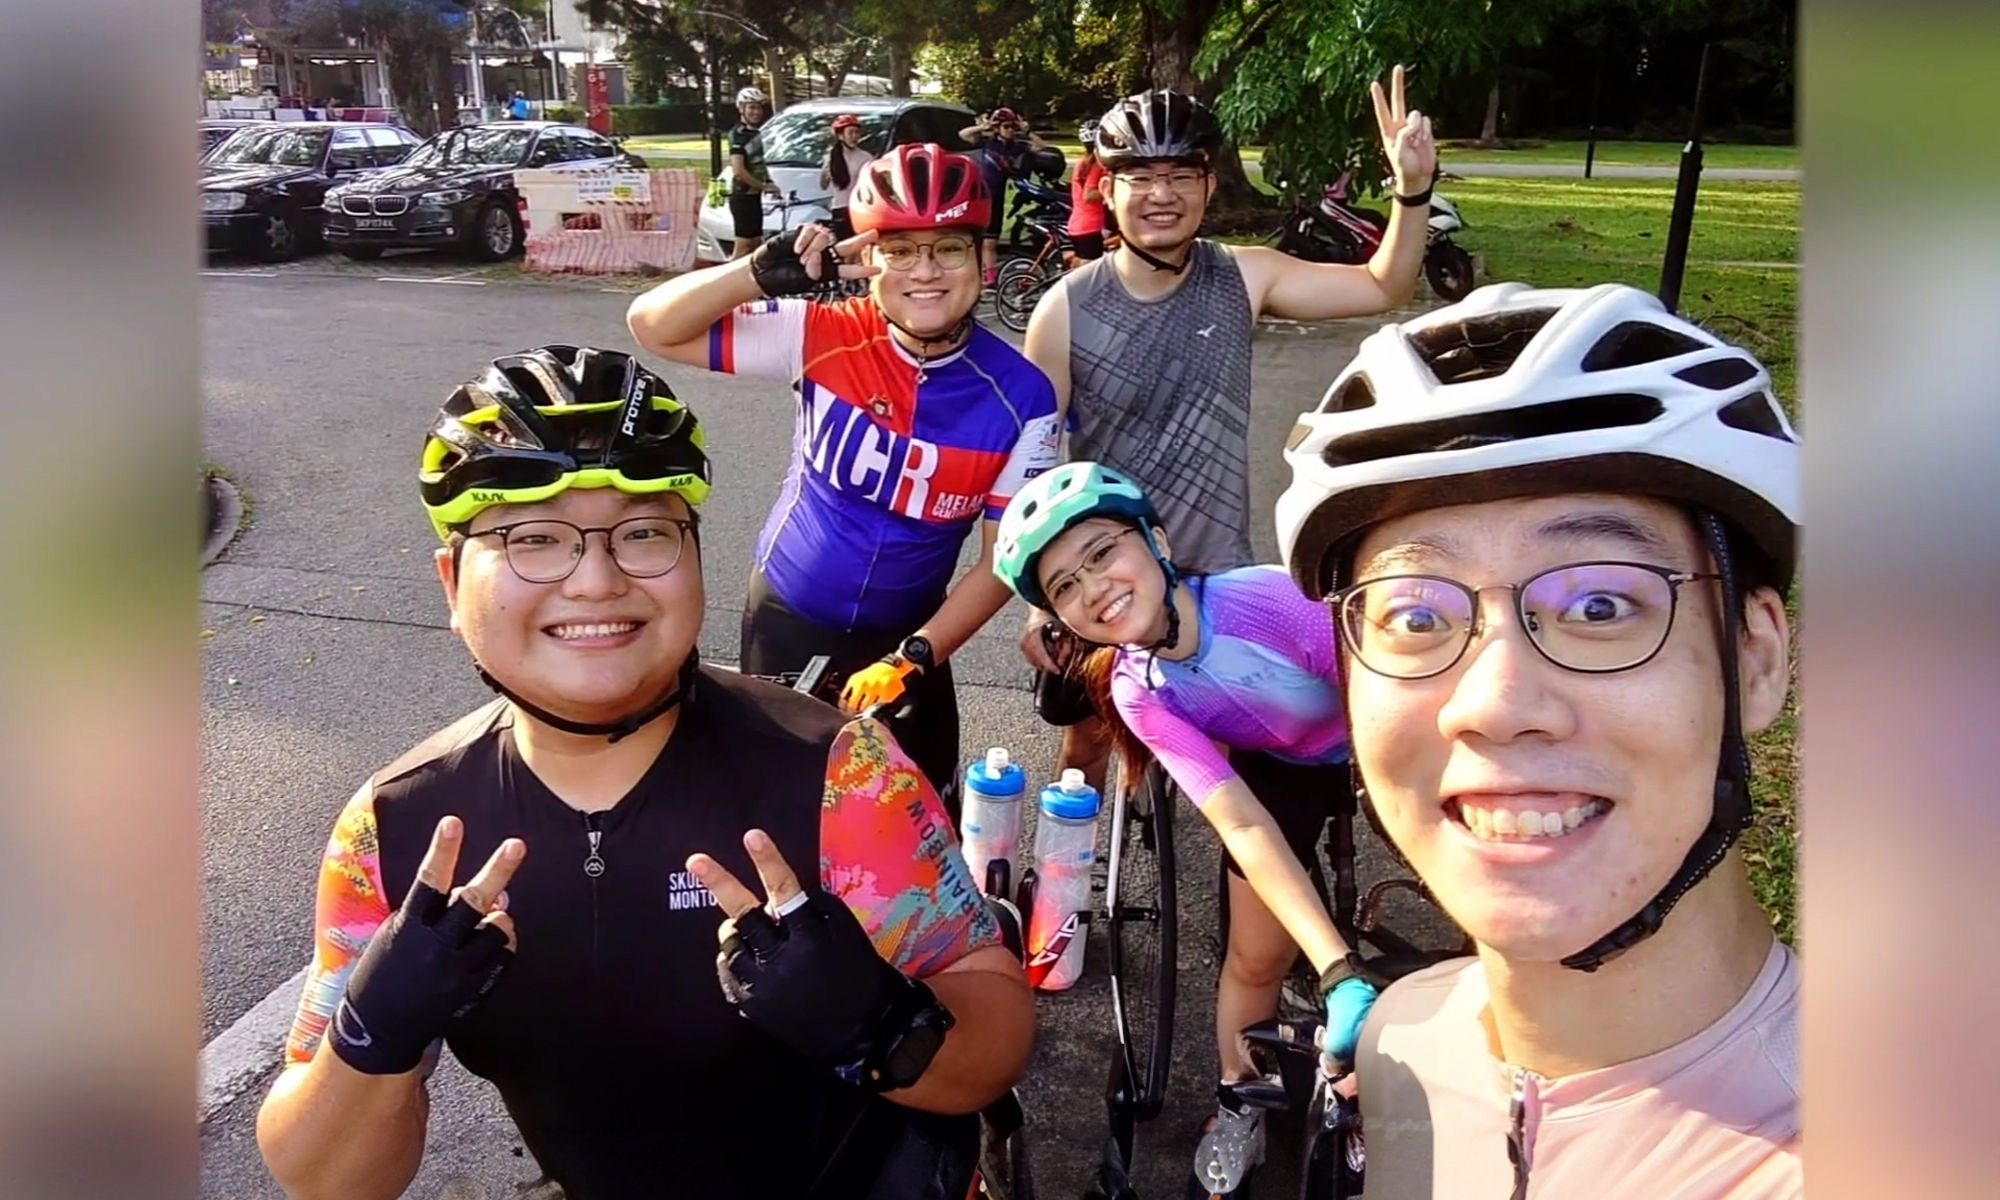 A group of Micron employees together at a biking event